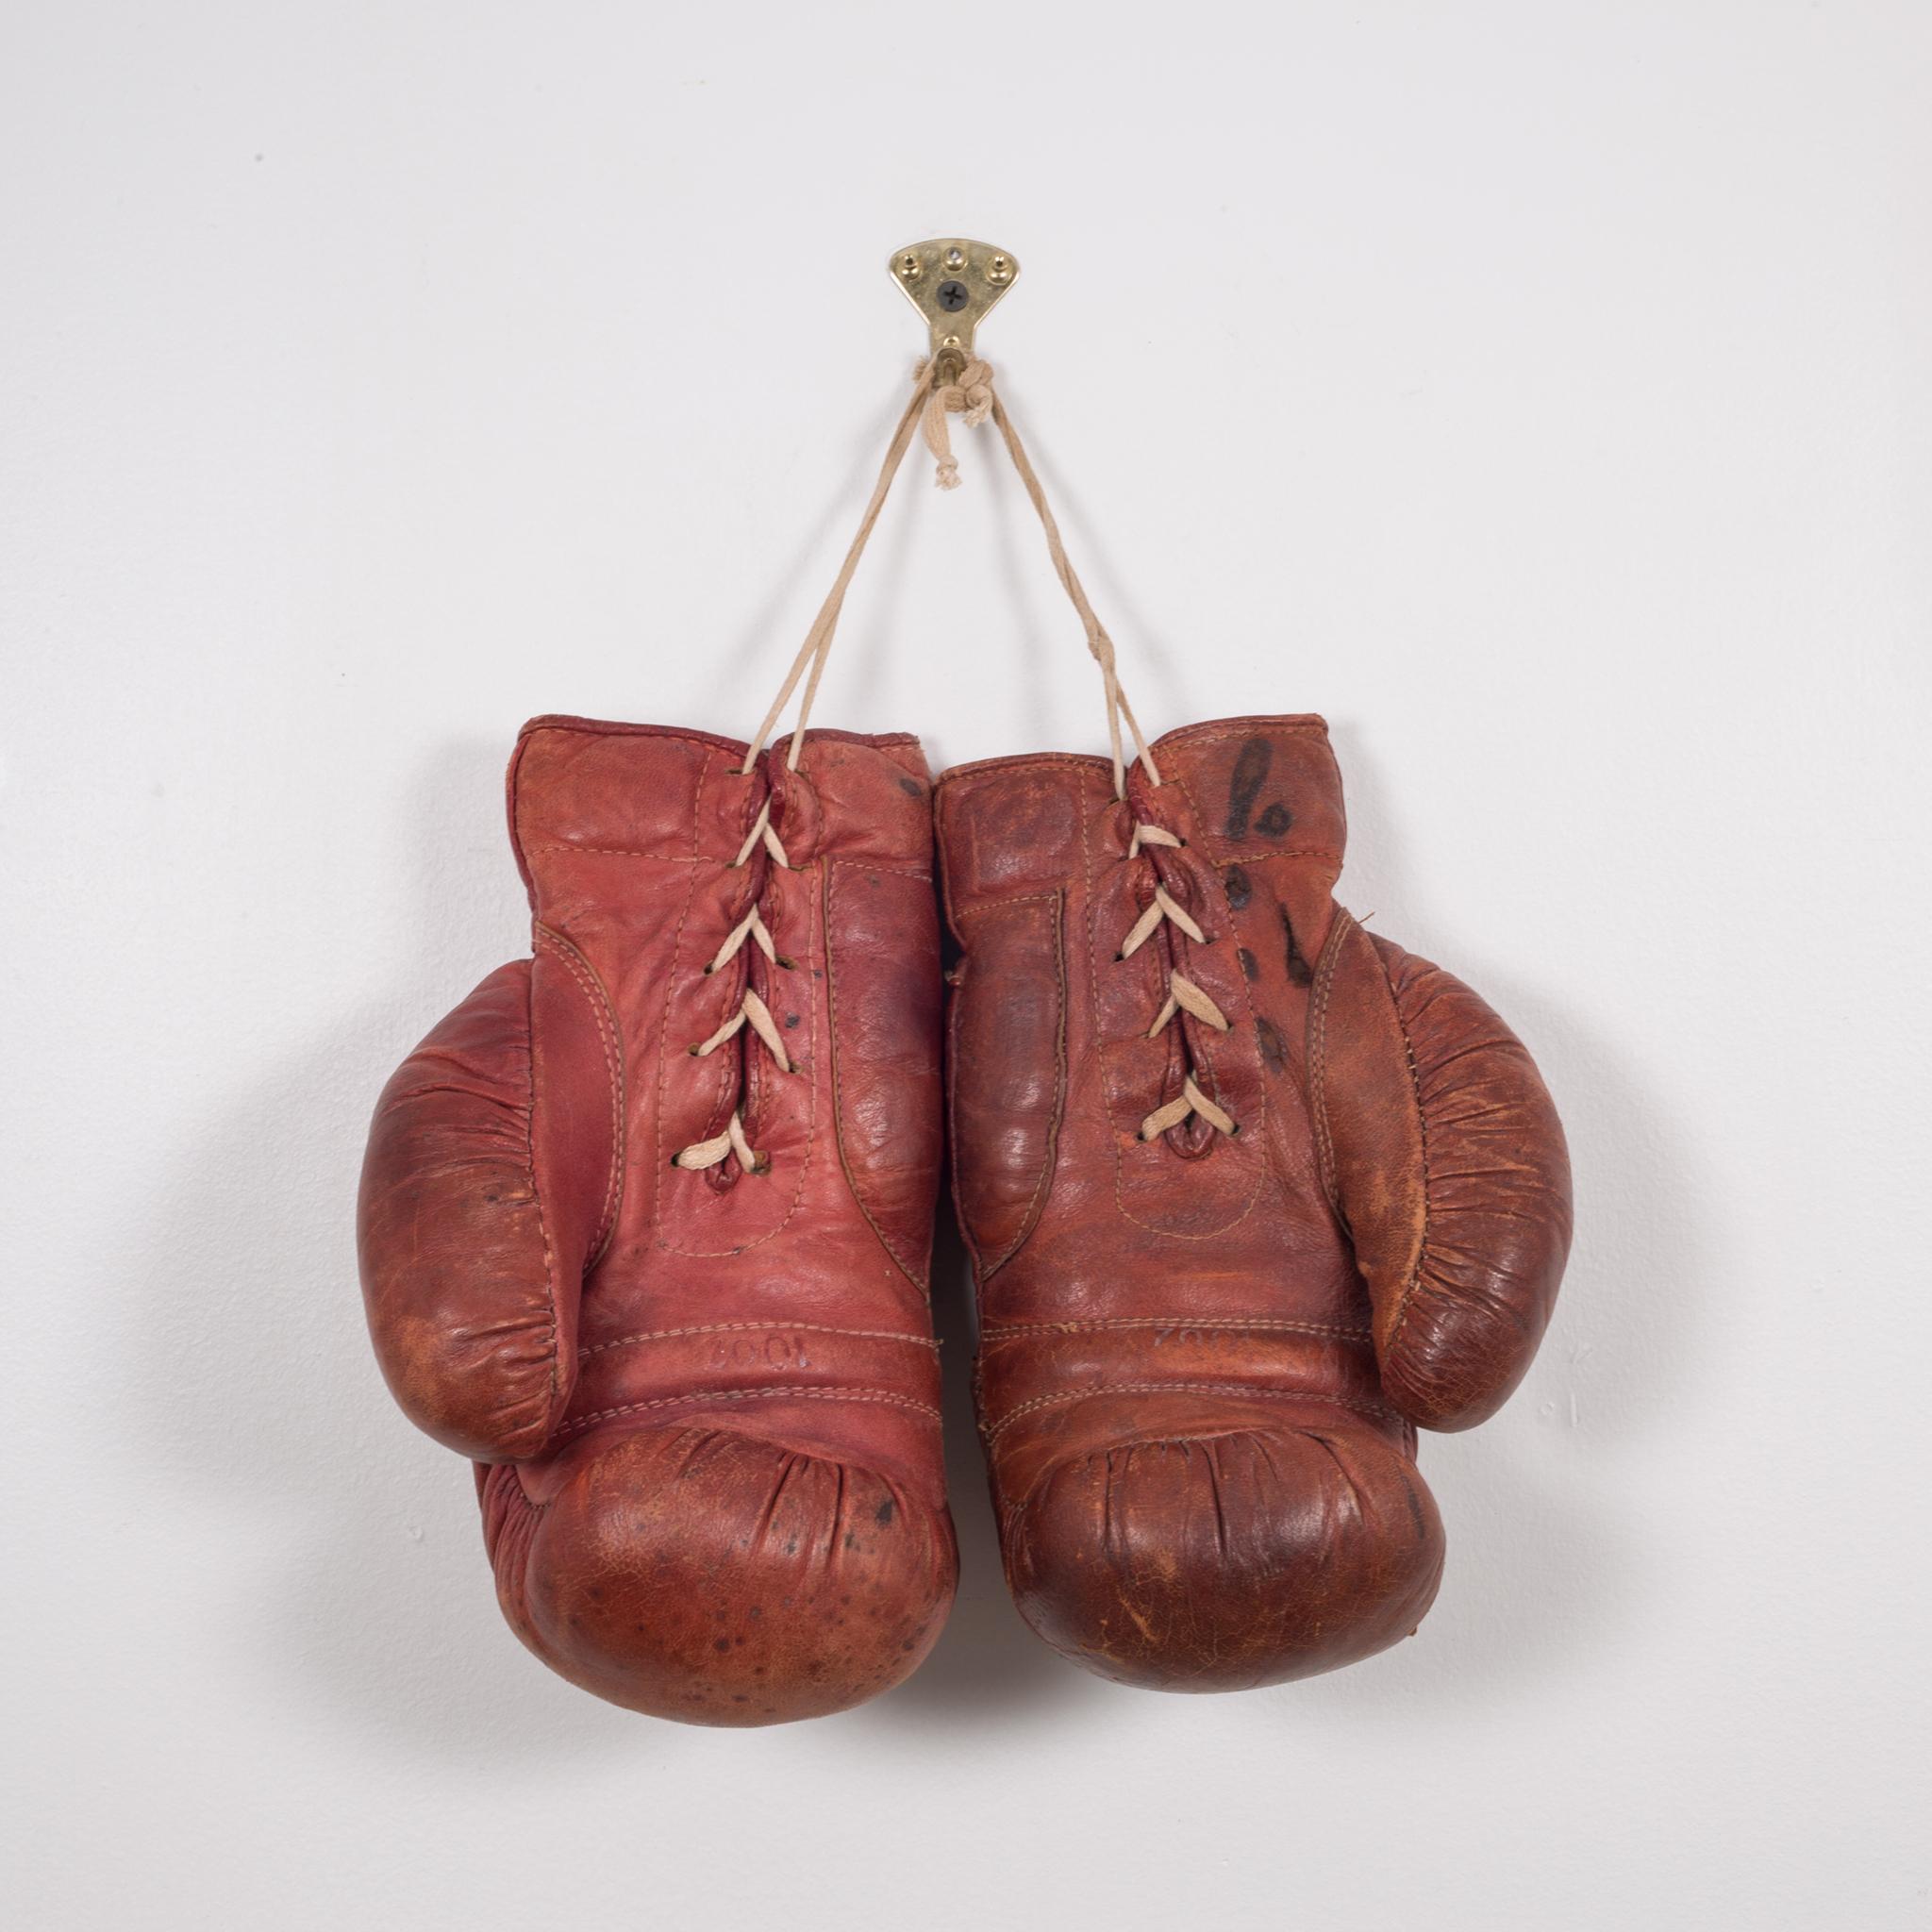 About

This is a original pair of vintage boxing gloves. The gloves are a maroon leather with white laces. They are both have a label 